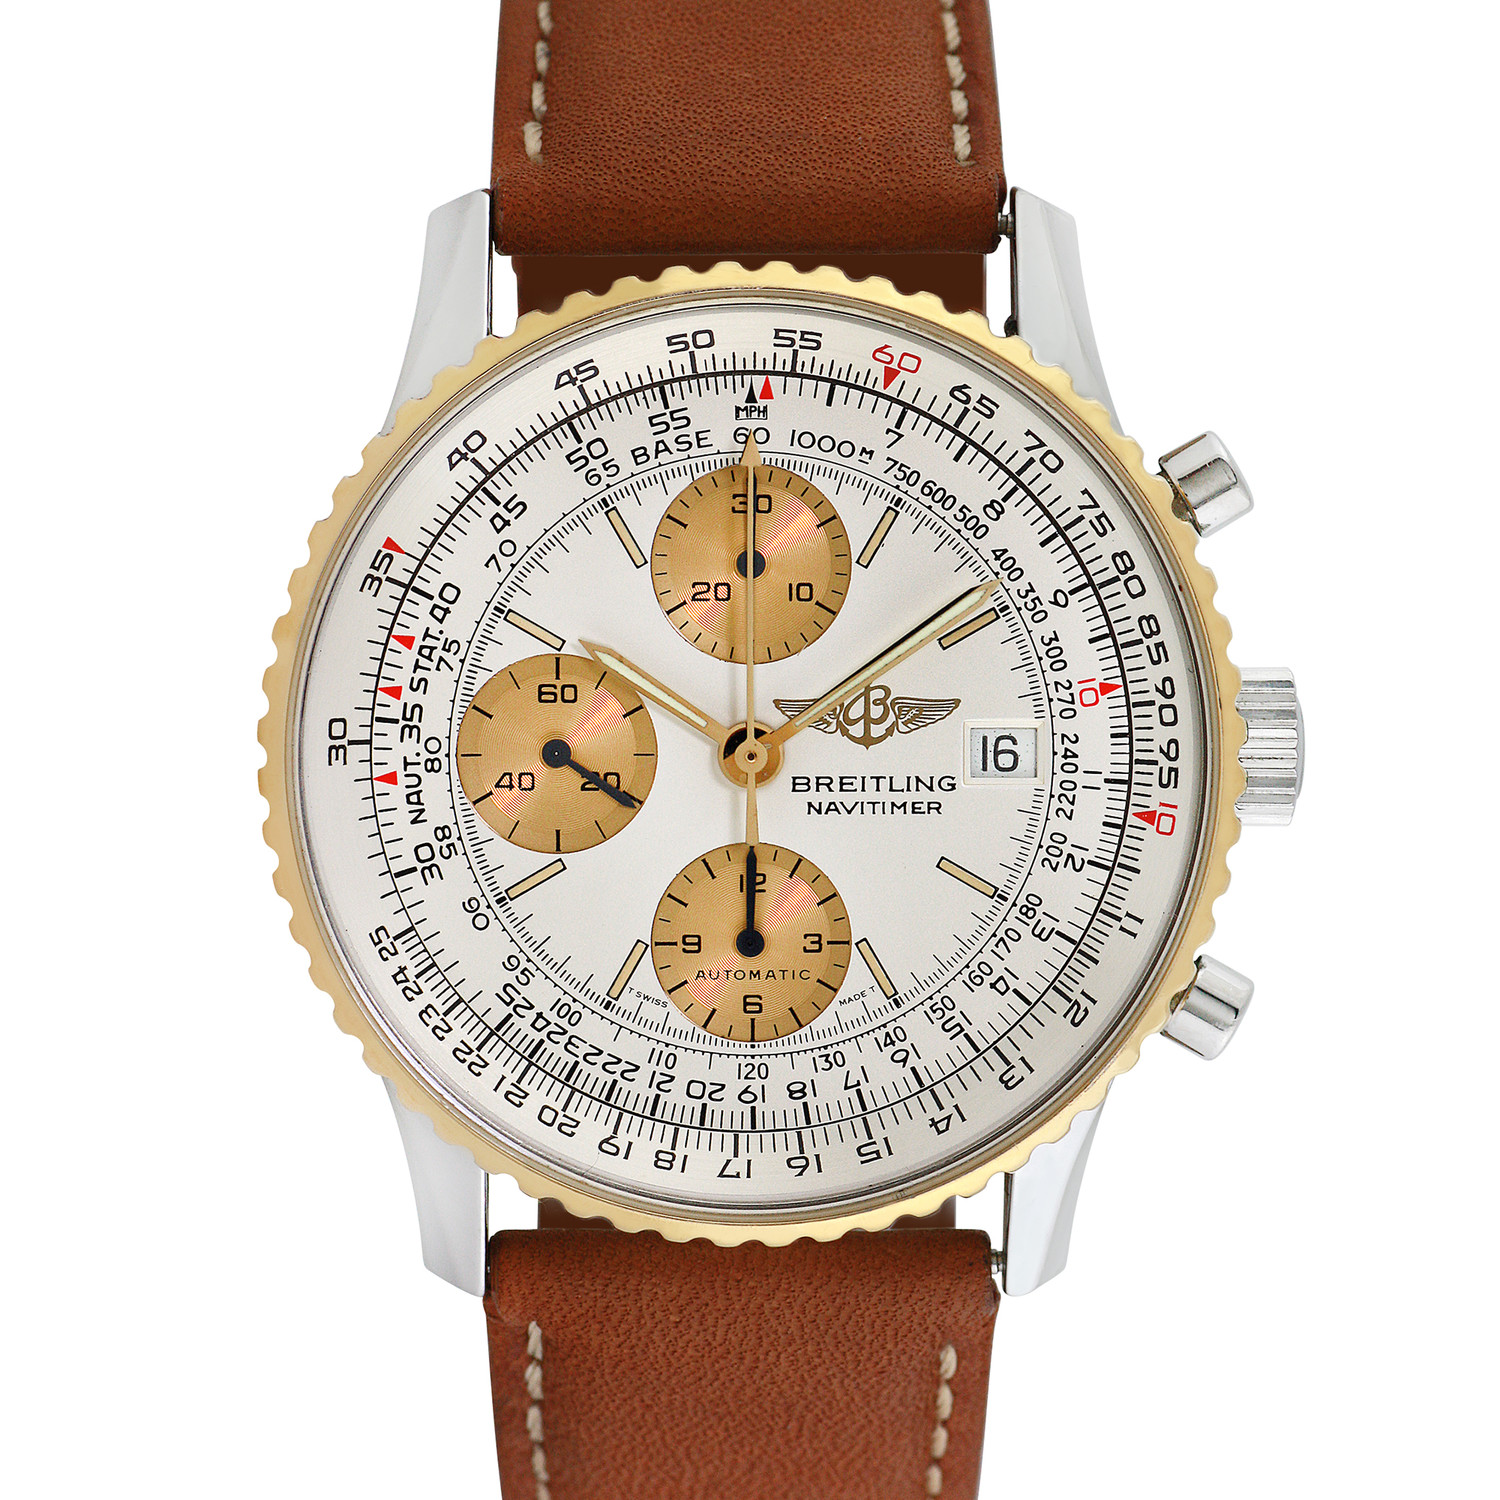 Breitling Old Navitimer II Automatic // D13022 // Pre-Owned - Vintage ...